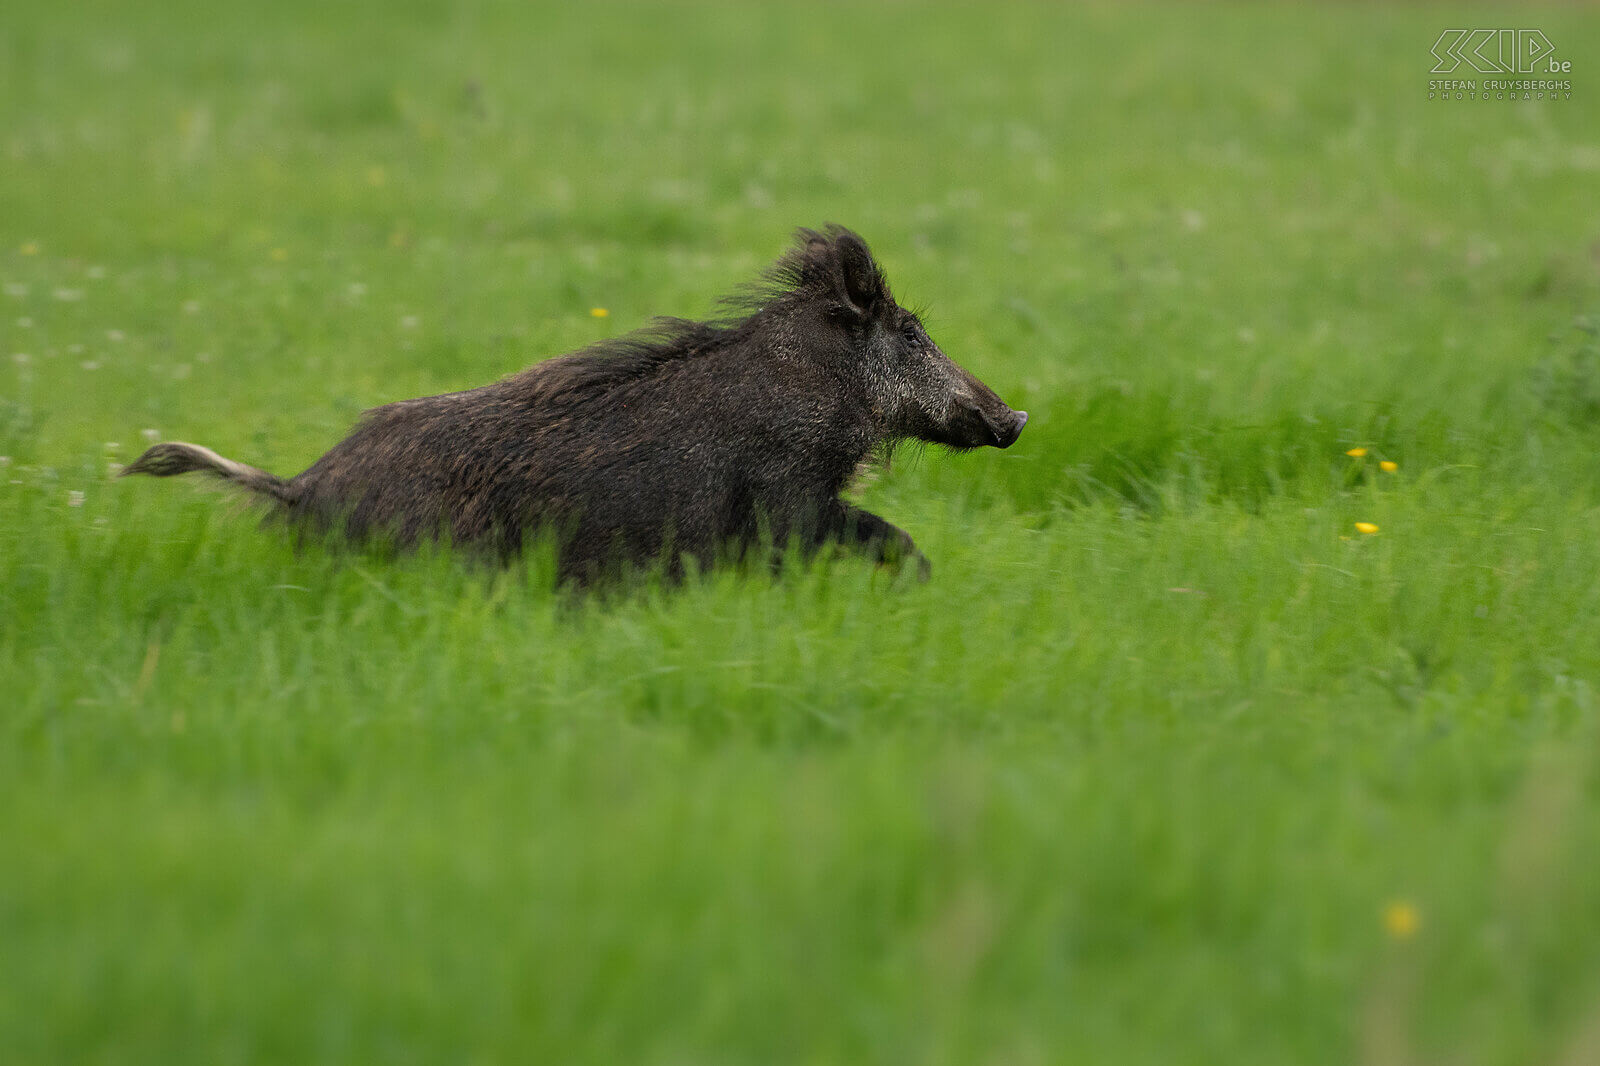 Wild boar fleeing Adult wild boar fleeing through the meadow. Adult wild boards weigh between 60 and 100kg. They are omnivores and so they eat nuts, fruits, roots, agricultural crops but also insects such as earthworms and snails, mice, frogs, ... Stefan Cruysberghs